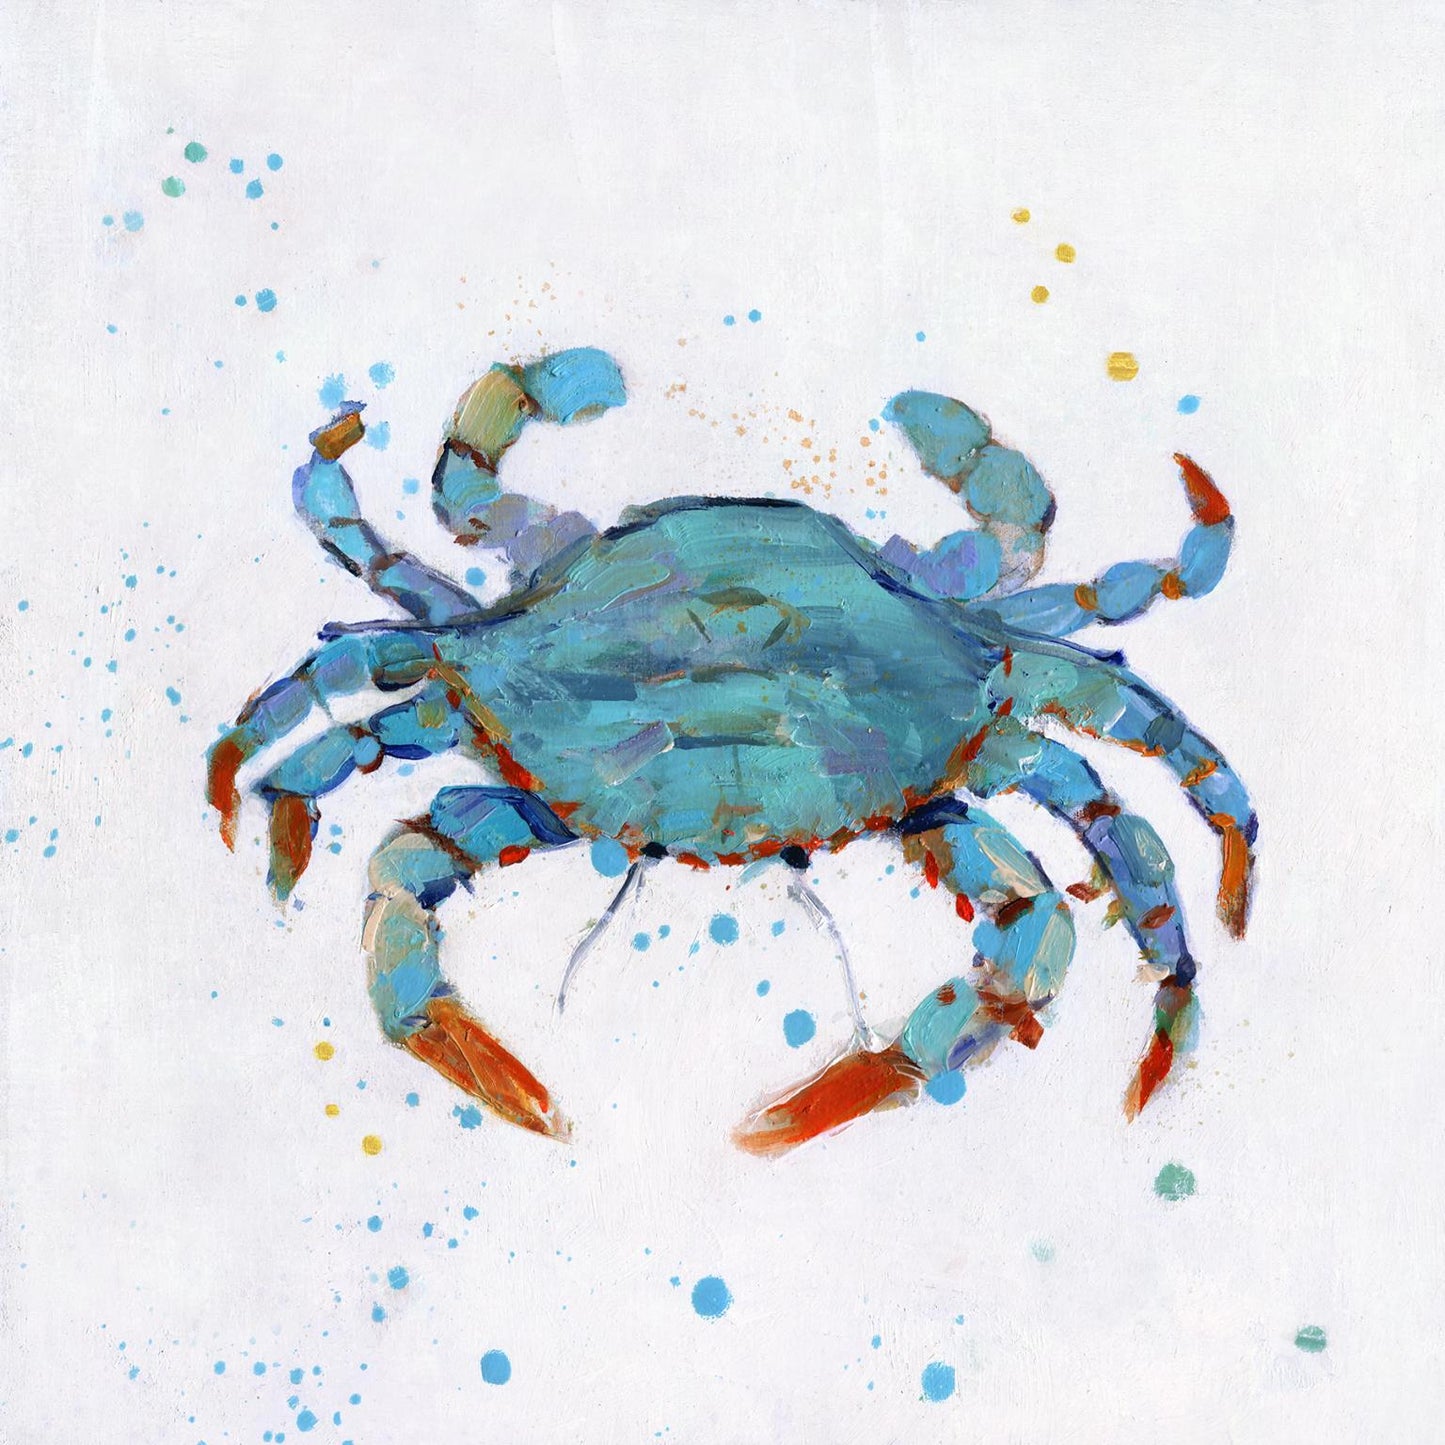 Framed Small - Bubbly Blue Crab By Sally Swatland - Blue